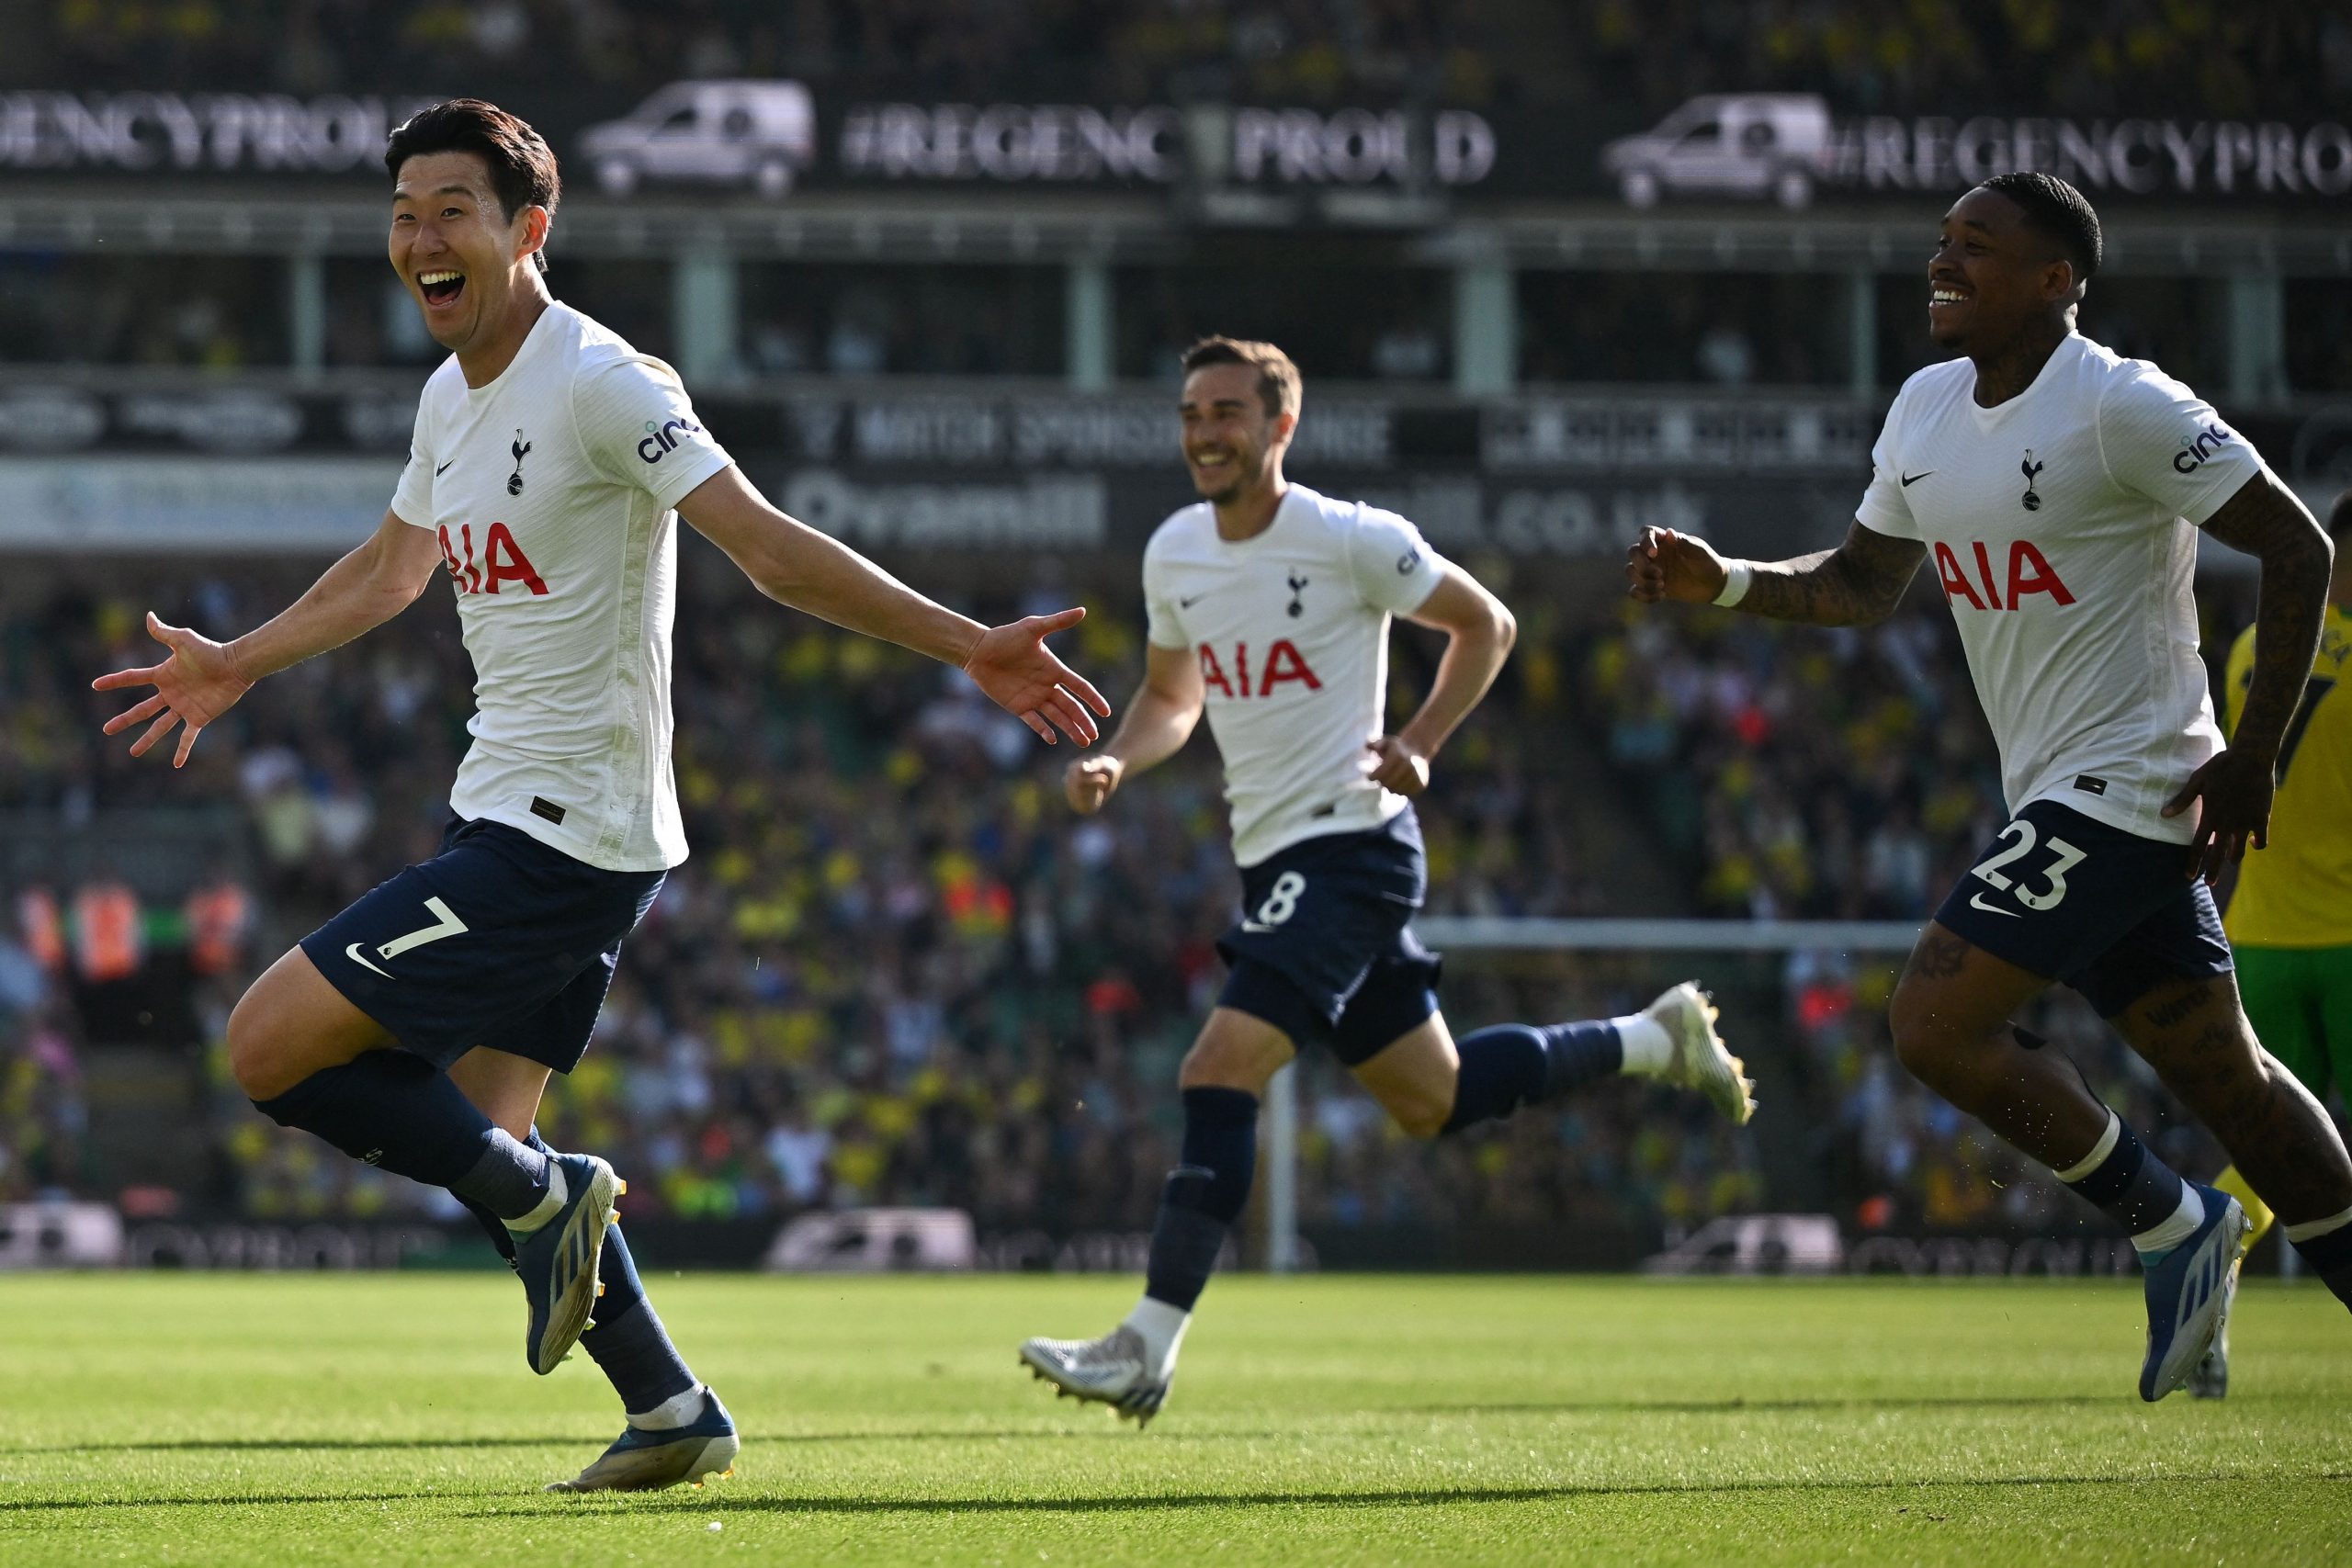 Twitter reaction: Tottenham Hotspur fans react to 5-0 win over Norwich City in the final game of the campaign.